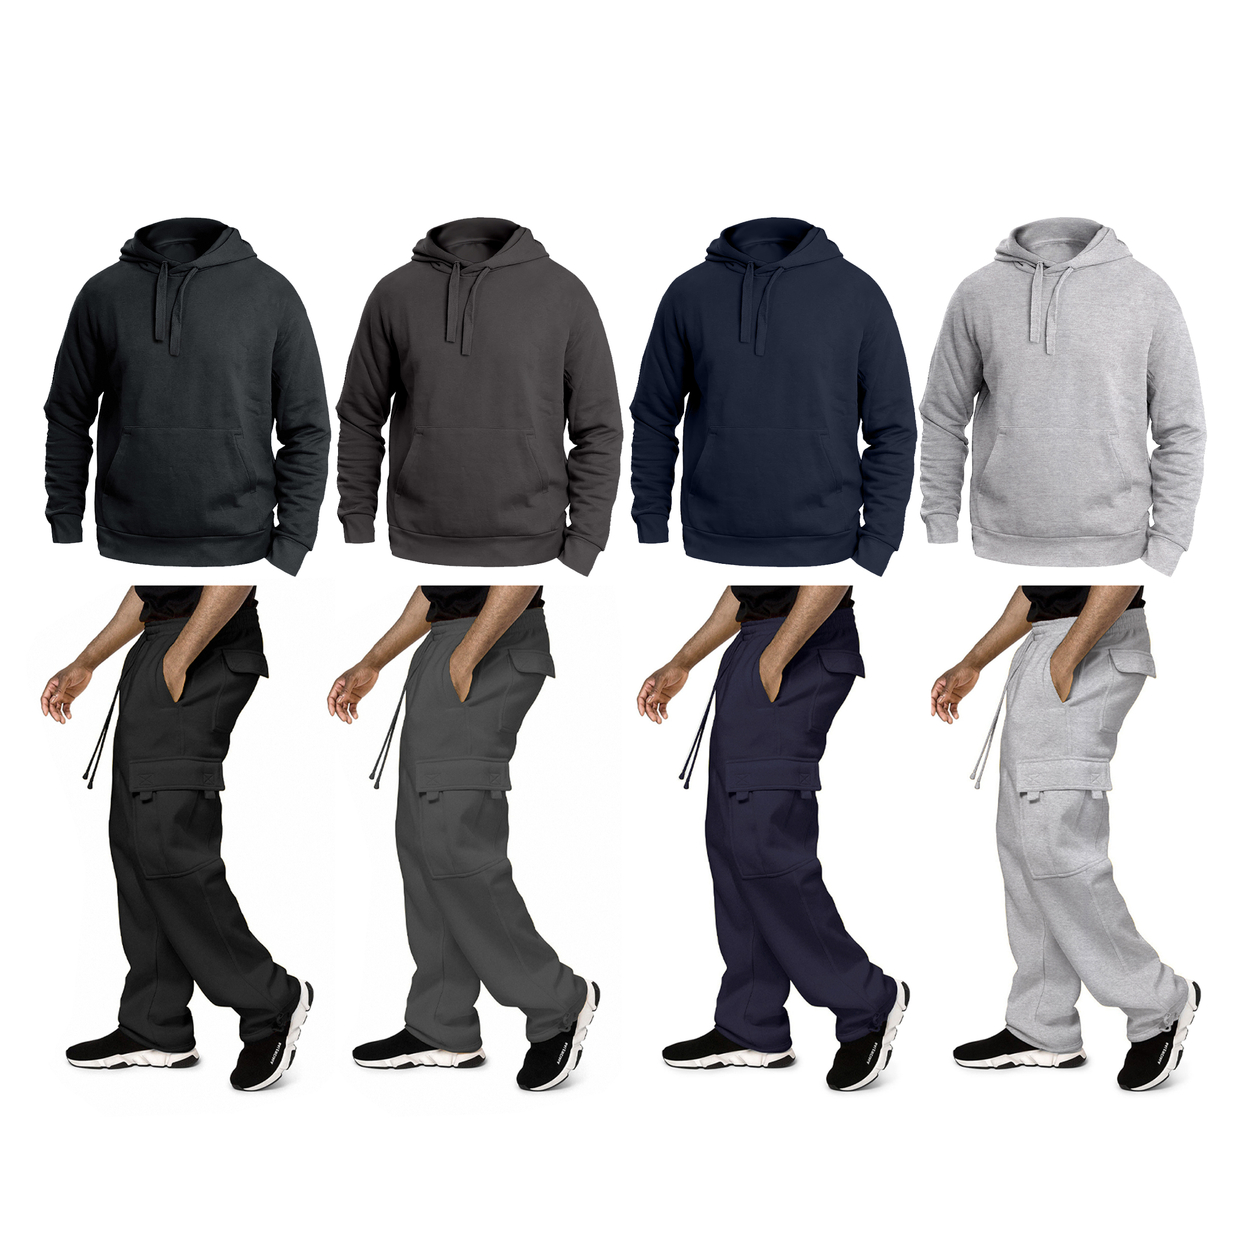 2-Pack: Men's Big & Tall Winter Warm Cozy Athletic Fleece Lined Multi-Pocket Cargo Sweatsuit - Charcoal, Large